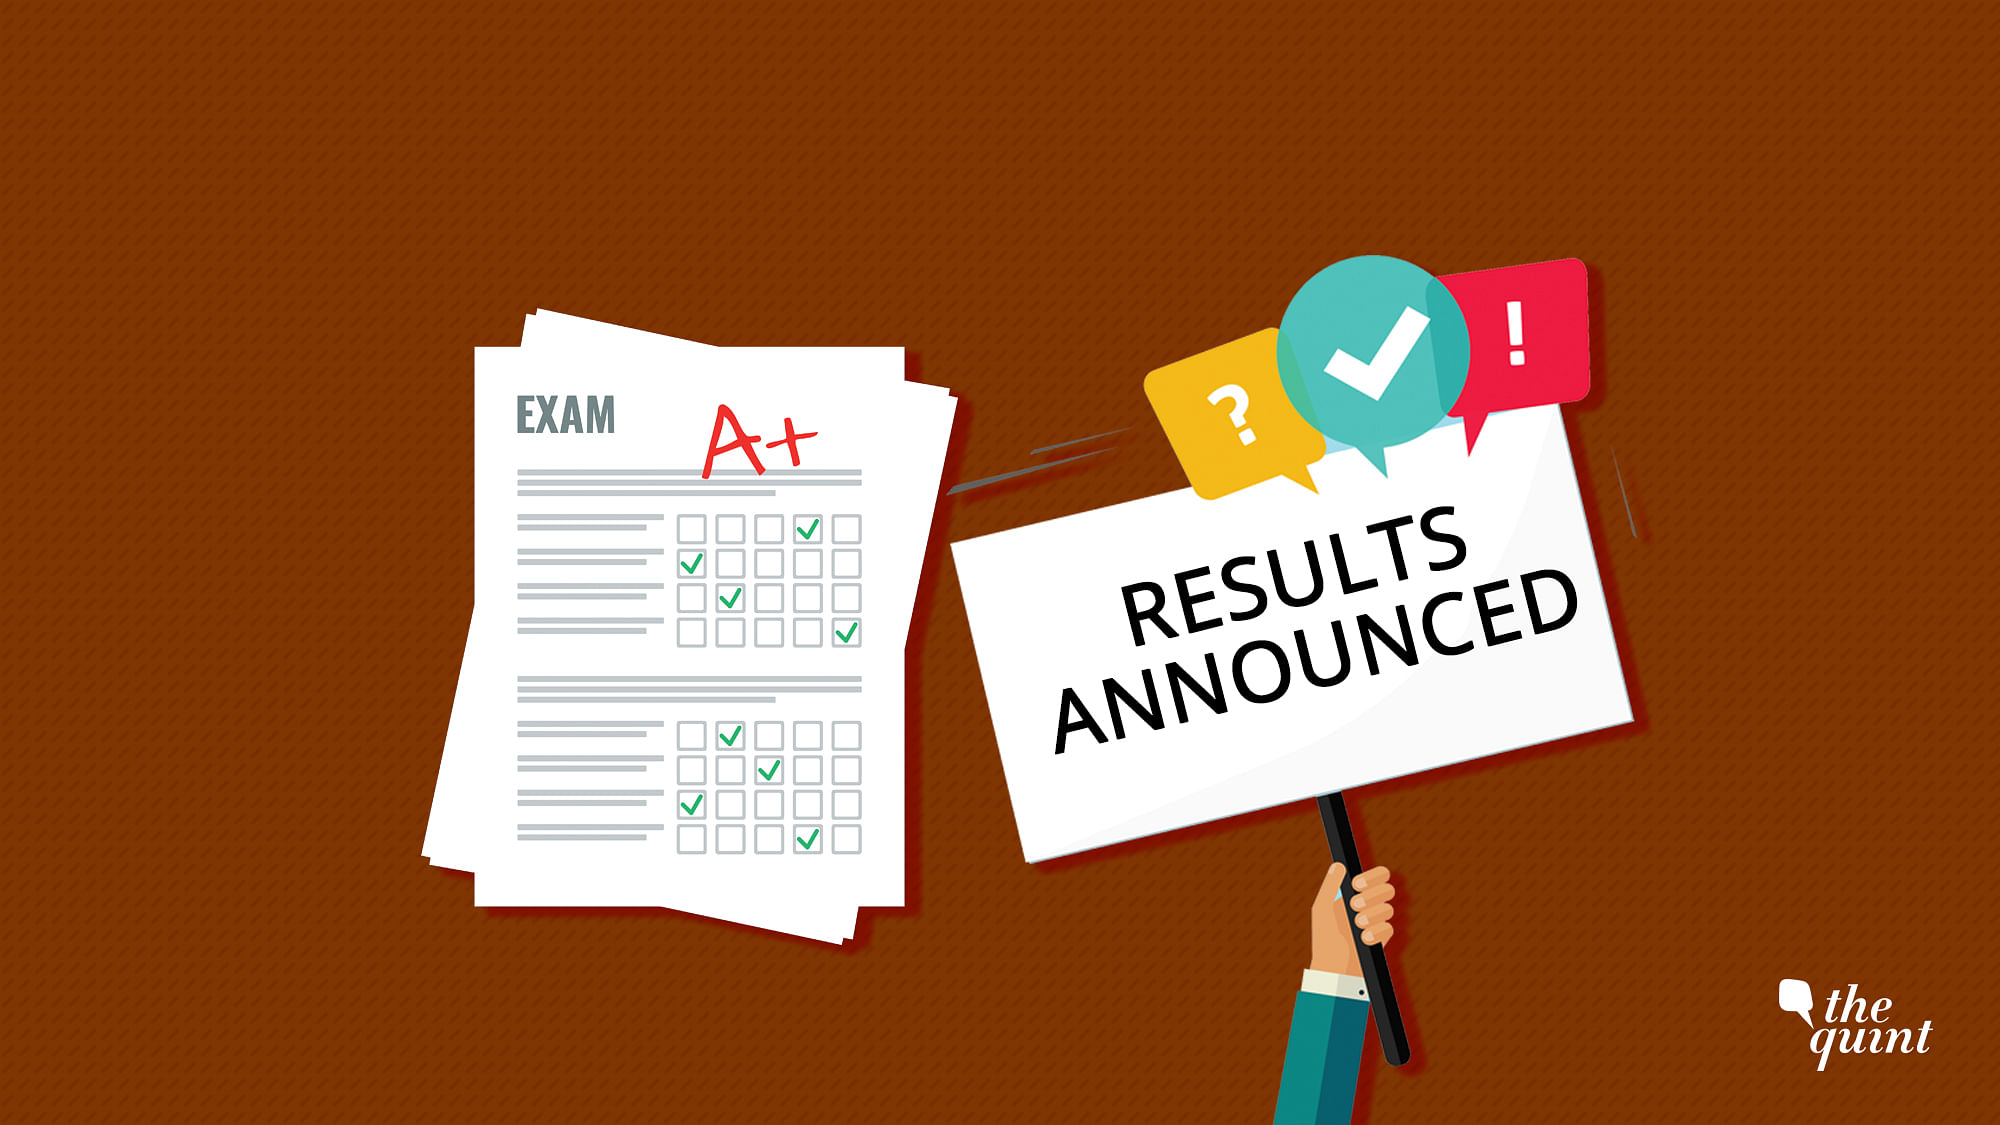 APRJC CET Result 2019 : Andhra Pradesh Residential Junior College (APRJC) announced the CET 2019 result on it’s official website.